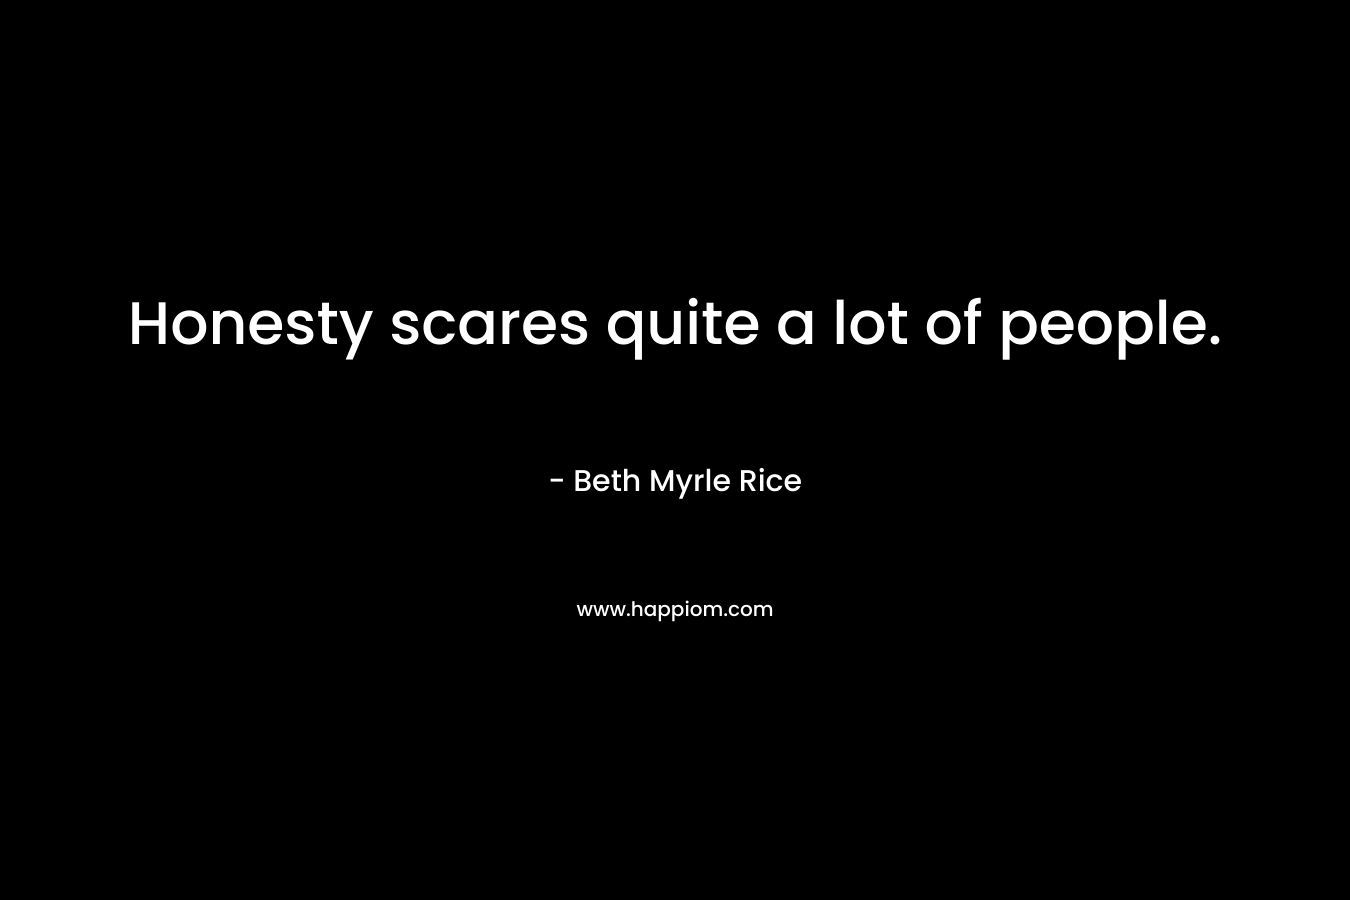 Honesty scares quite a lot of people. – Beth Myrle Rice